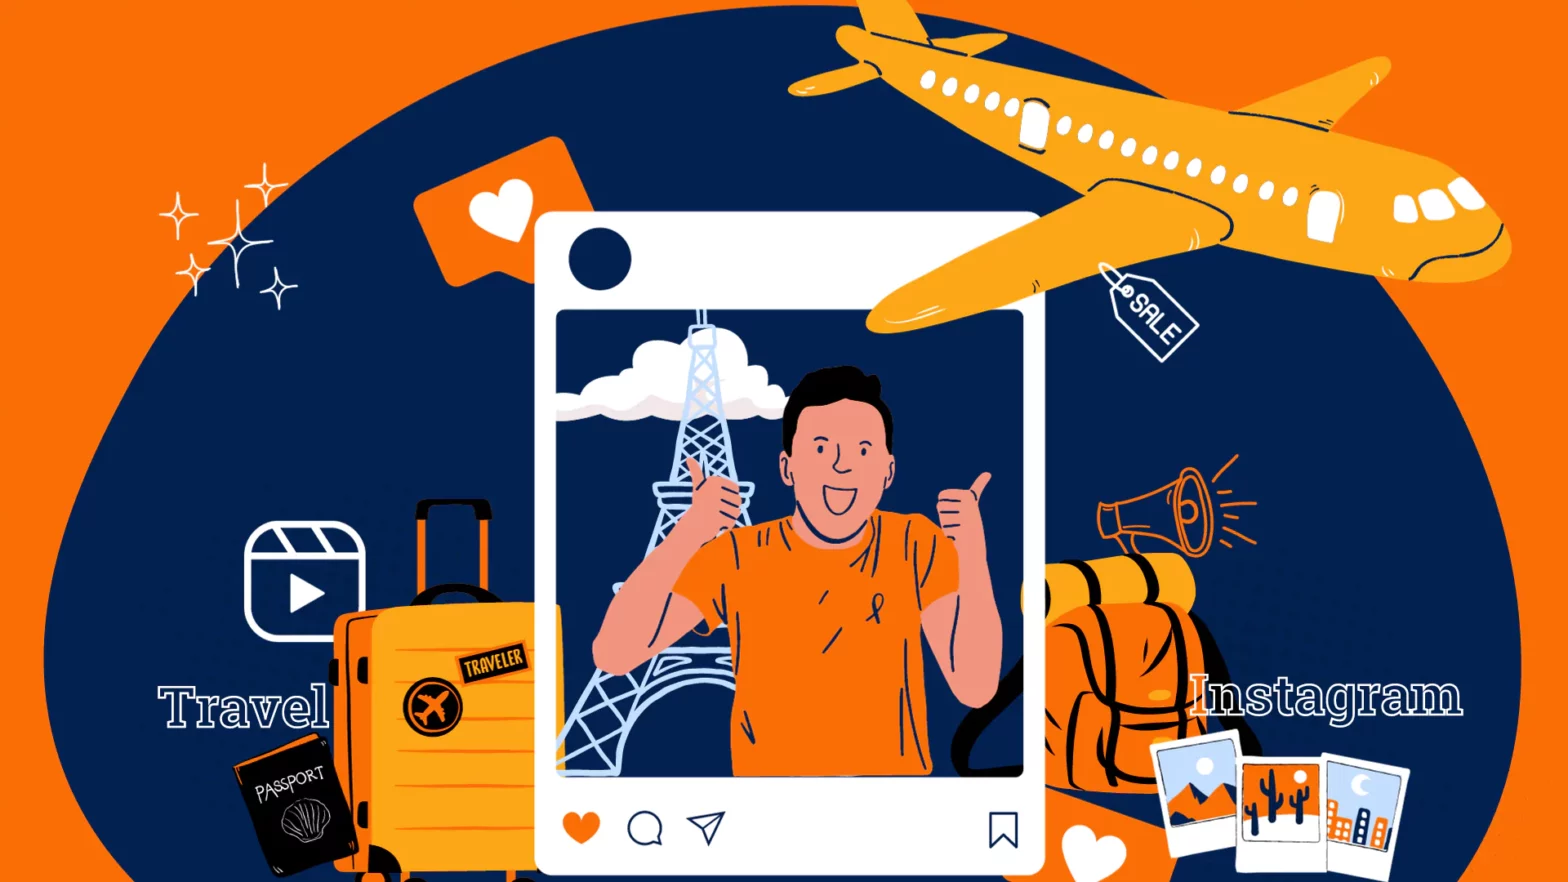 How to Promote Travel Business on Instagram